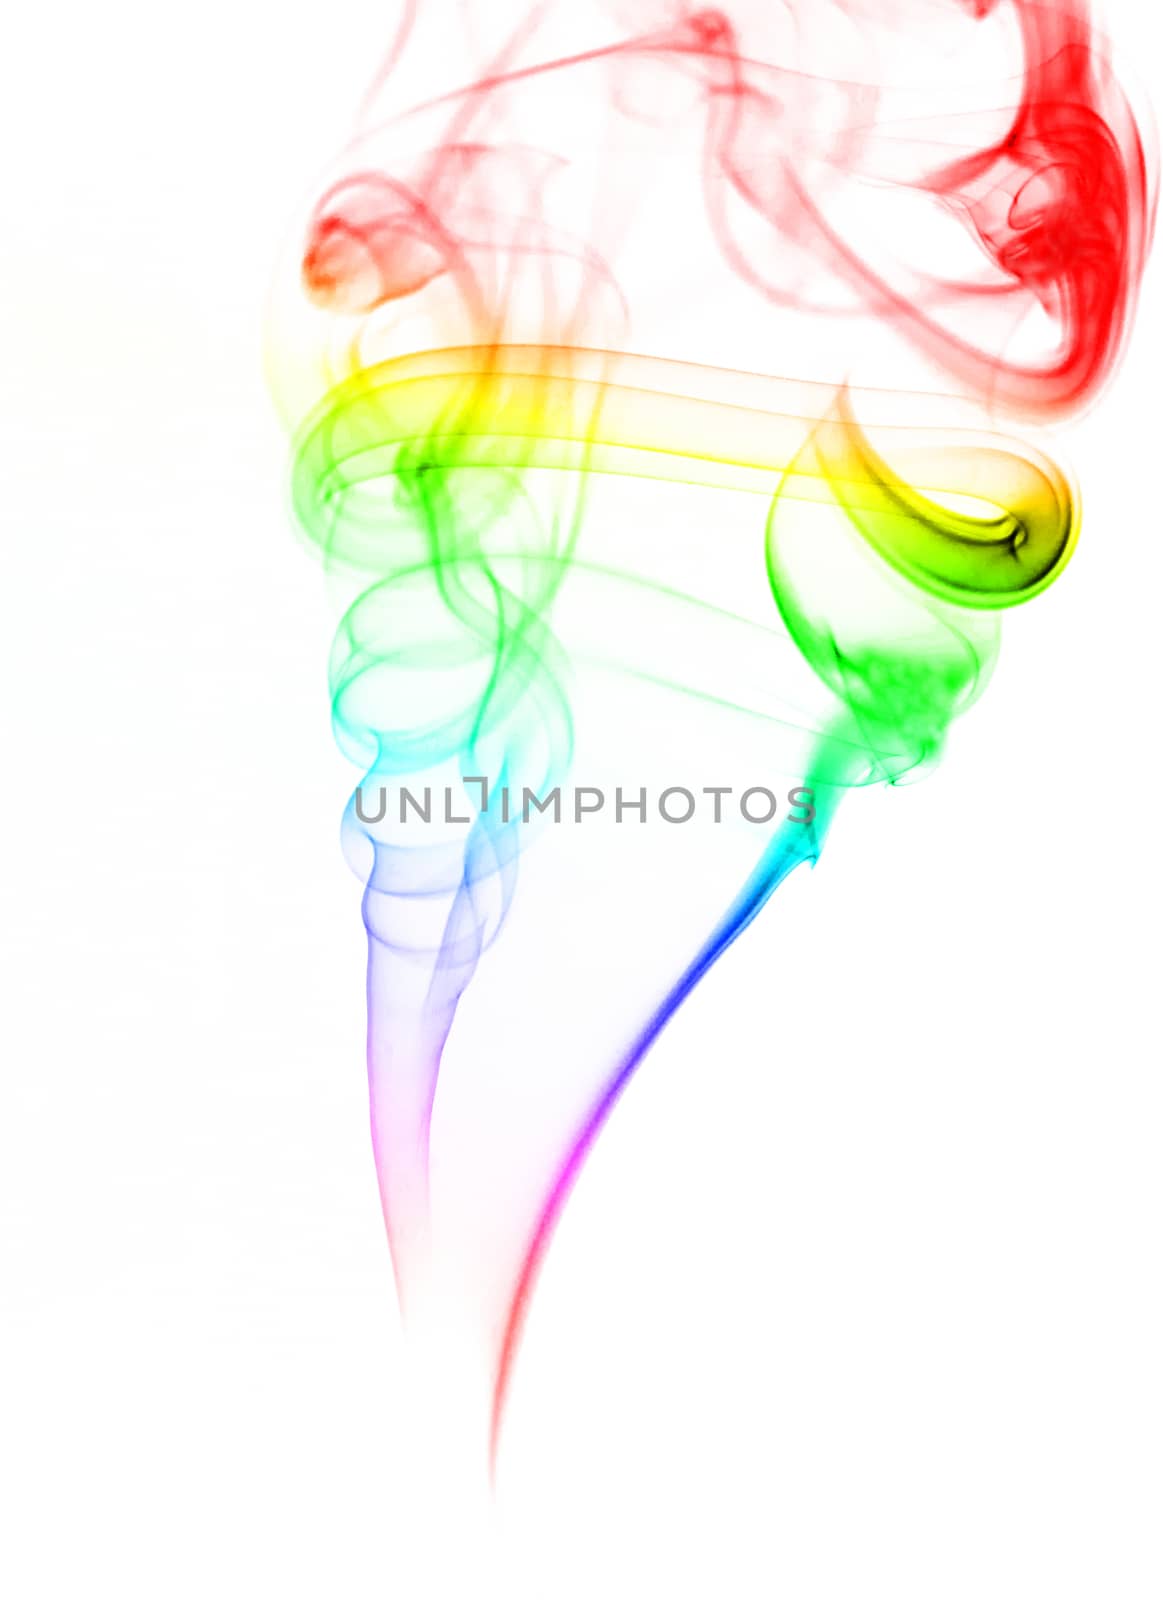 Abstract of color smoke on white background